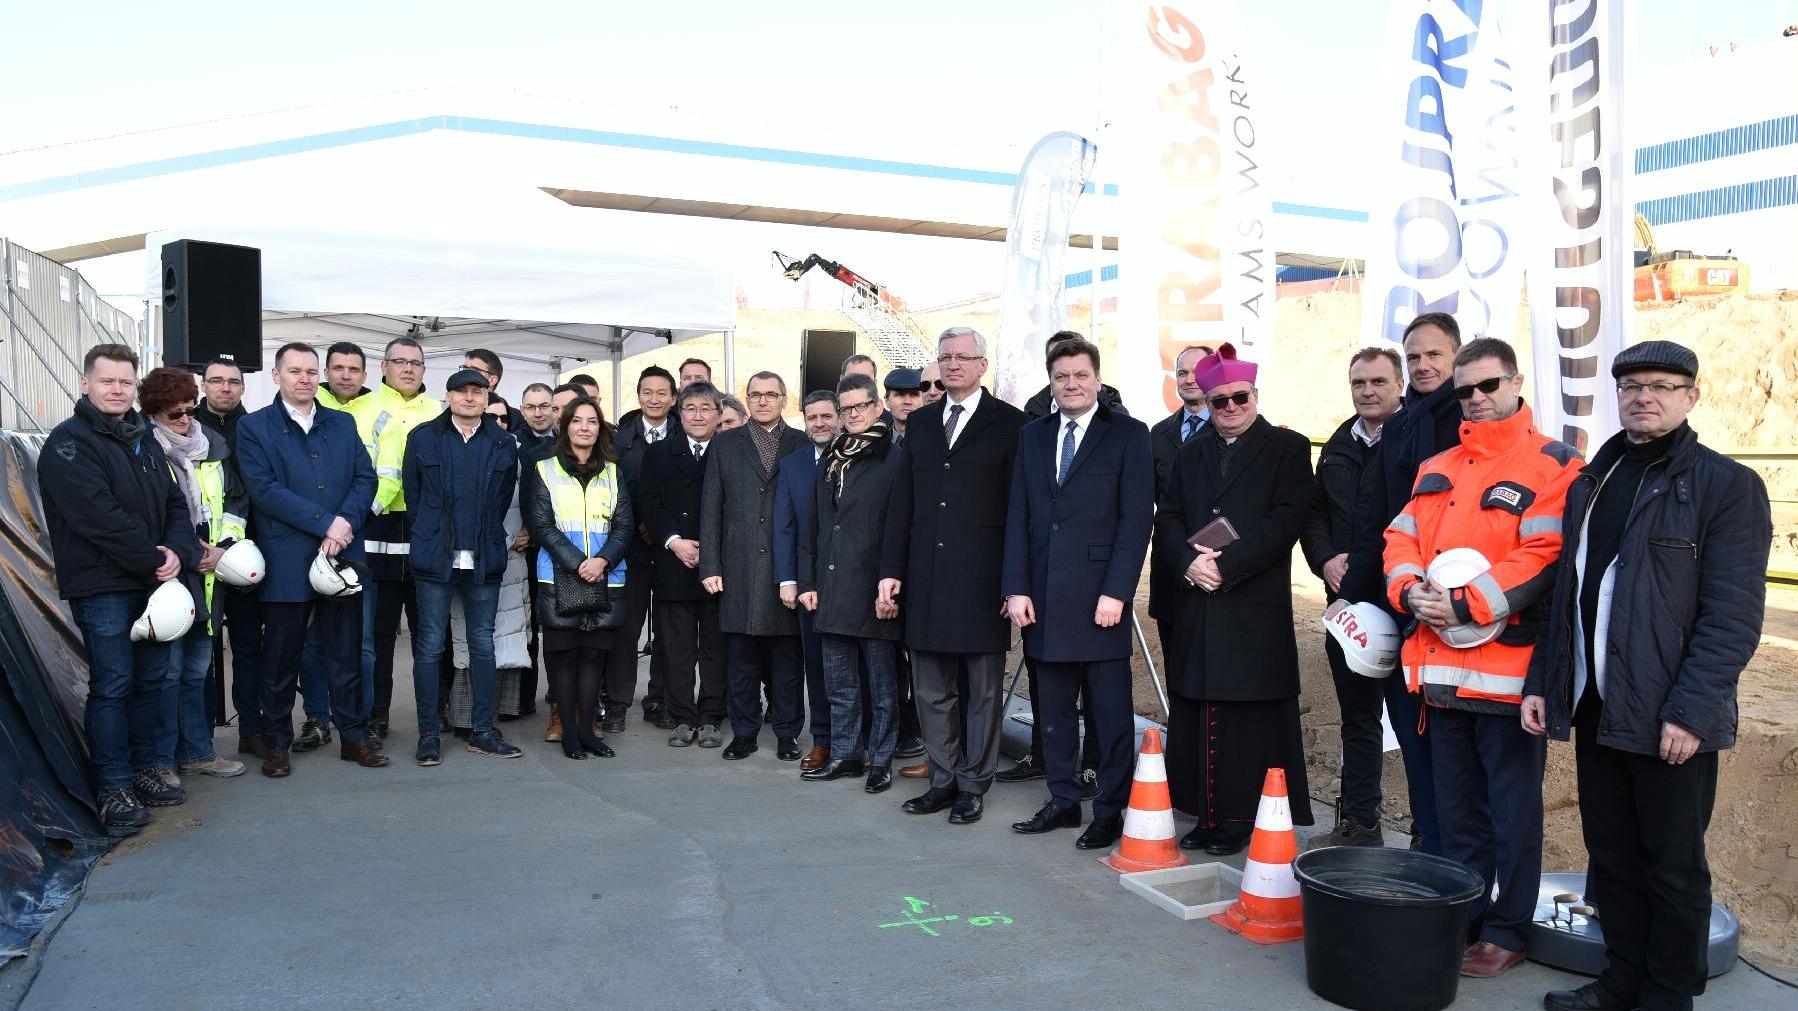 The cornerstone for new production plants has been laid - grafika artykułu